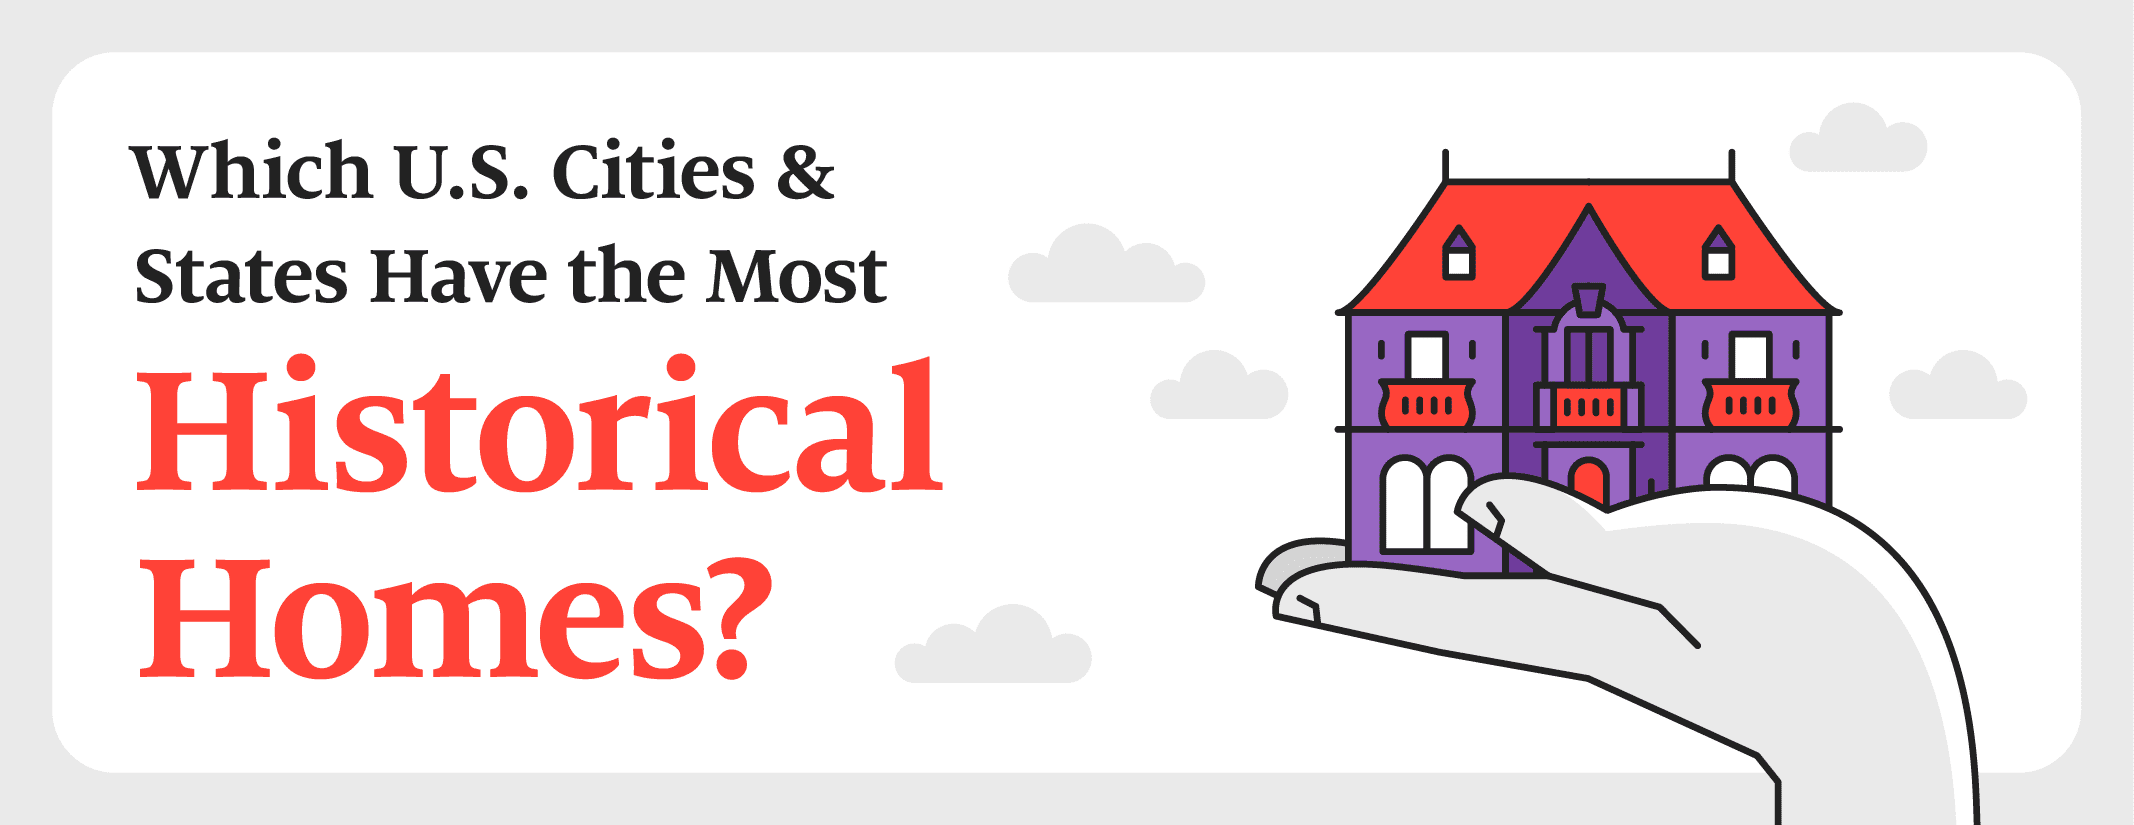 A header image for a blog about the U.S. cities with the most registered historical homes